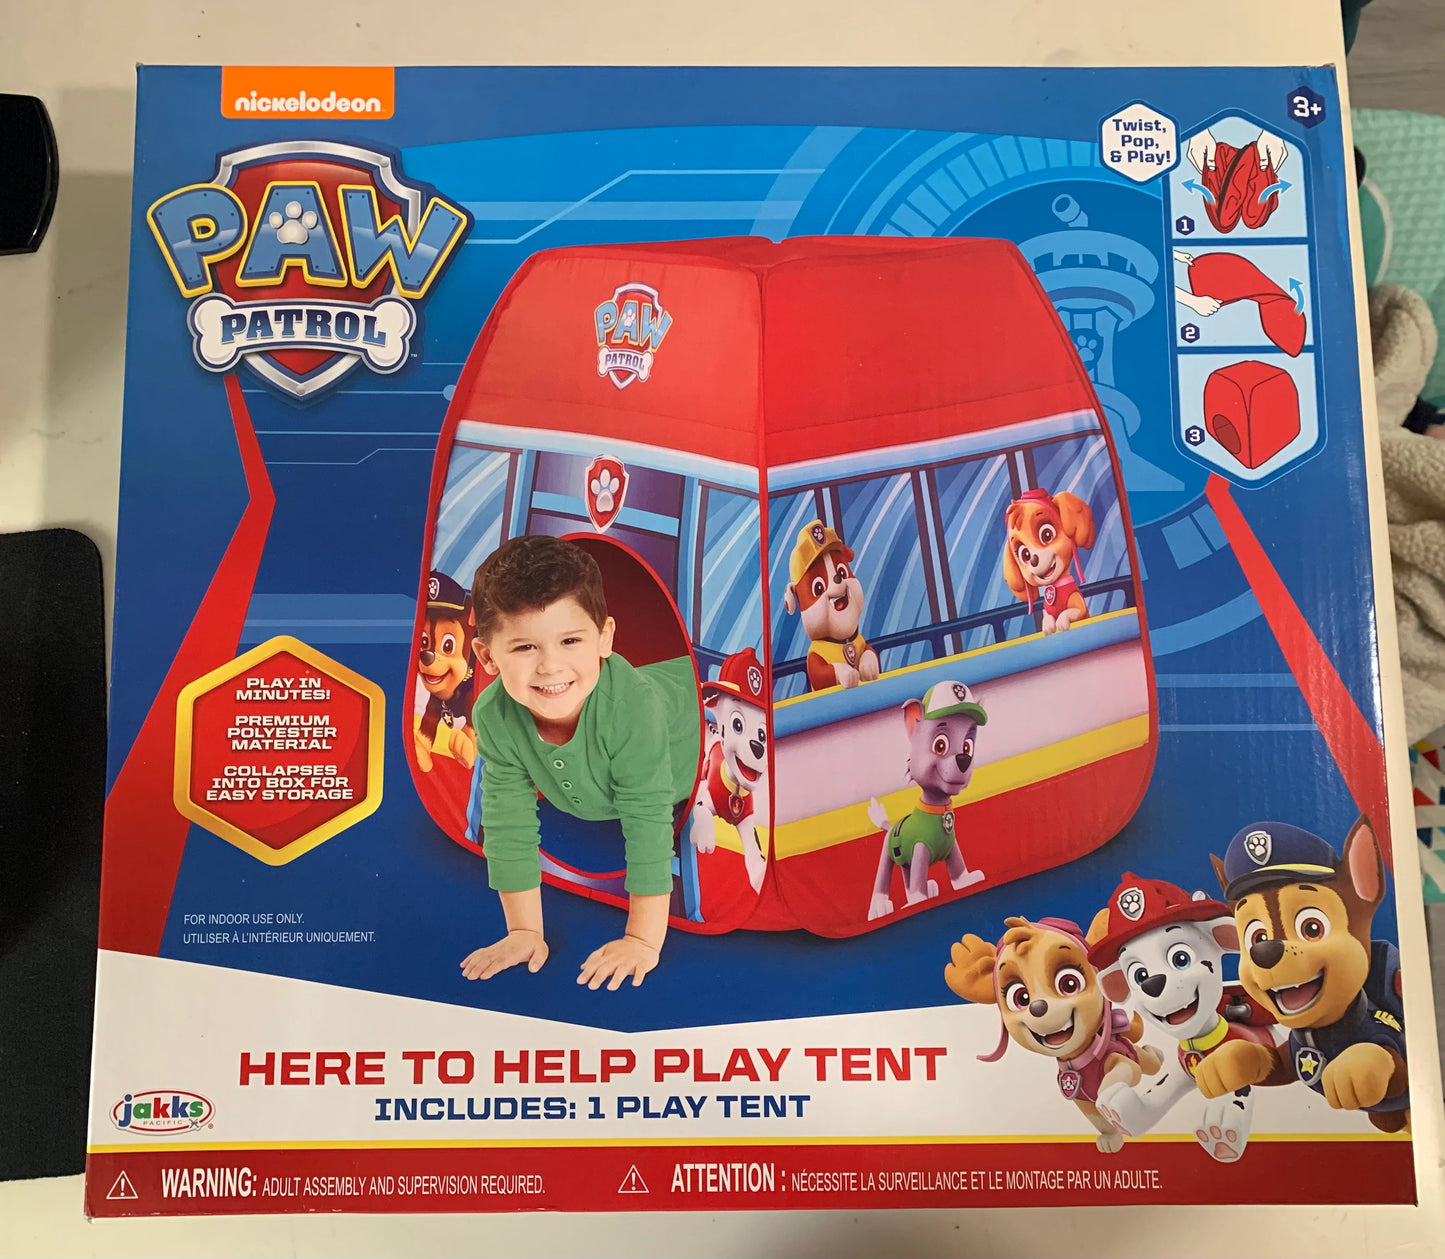 Paw Patrol Character Indoor/Outdoor Play Tent Playhouse for Kids with Easy Pop Up Set